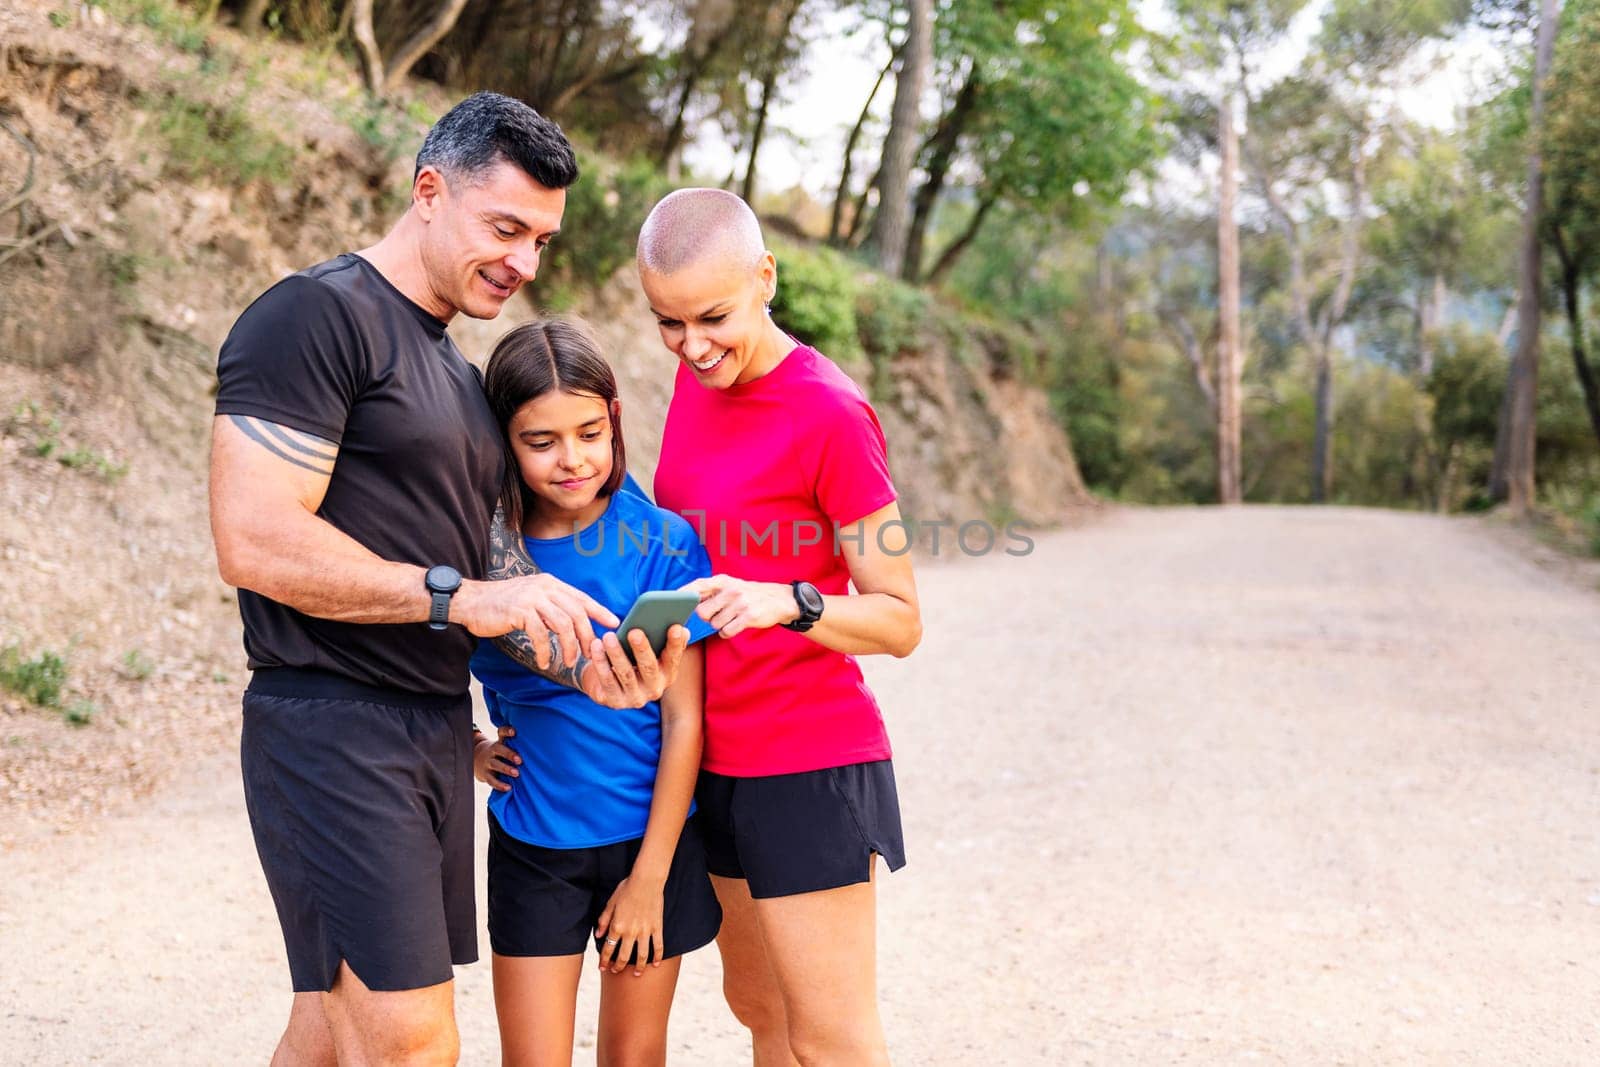 sporty family using a mobile phone to plan their training in the countryside, concept of sport with kids in nature and active lifestyle